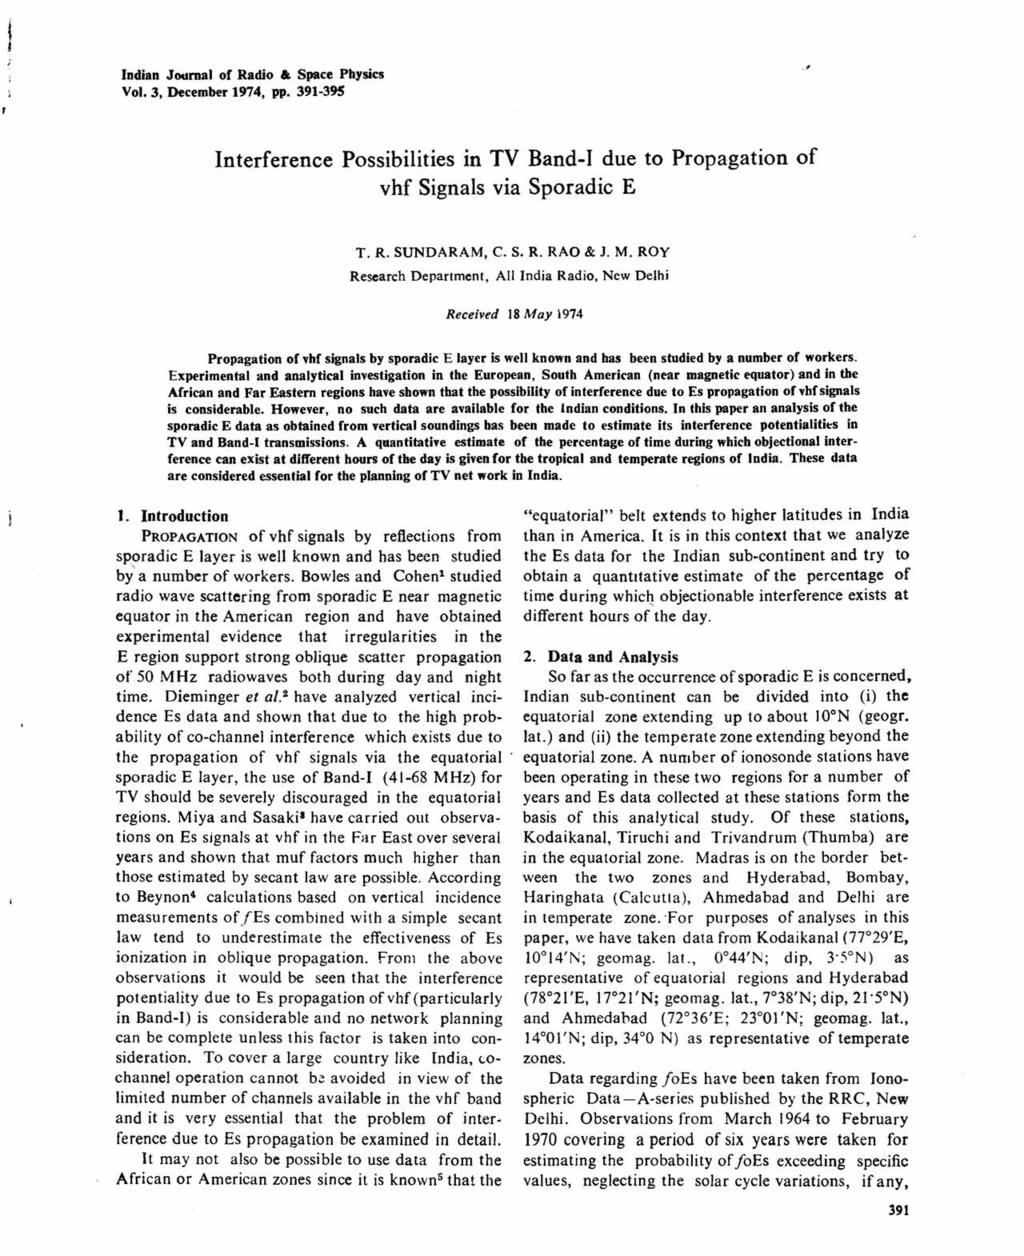 Indian Jurnal f Radi. Space Physics Vl. 3, December 1974, pp. 391-395 Interference Pssibilities in TV Band-I due t Prpagatin f vhf Signals via Spradic E T. R. SUNDARAM, C. S. R. RAO & J. M.